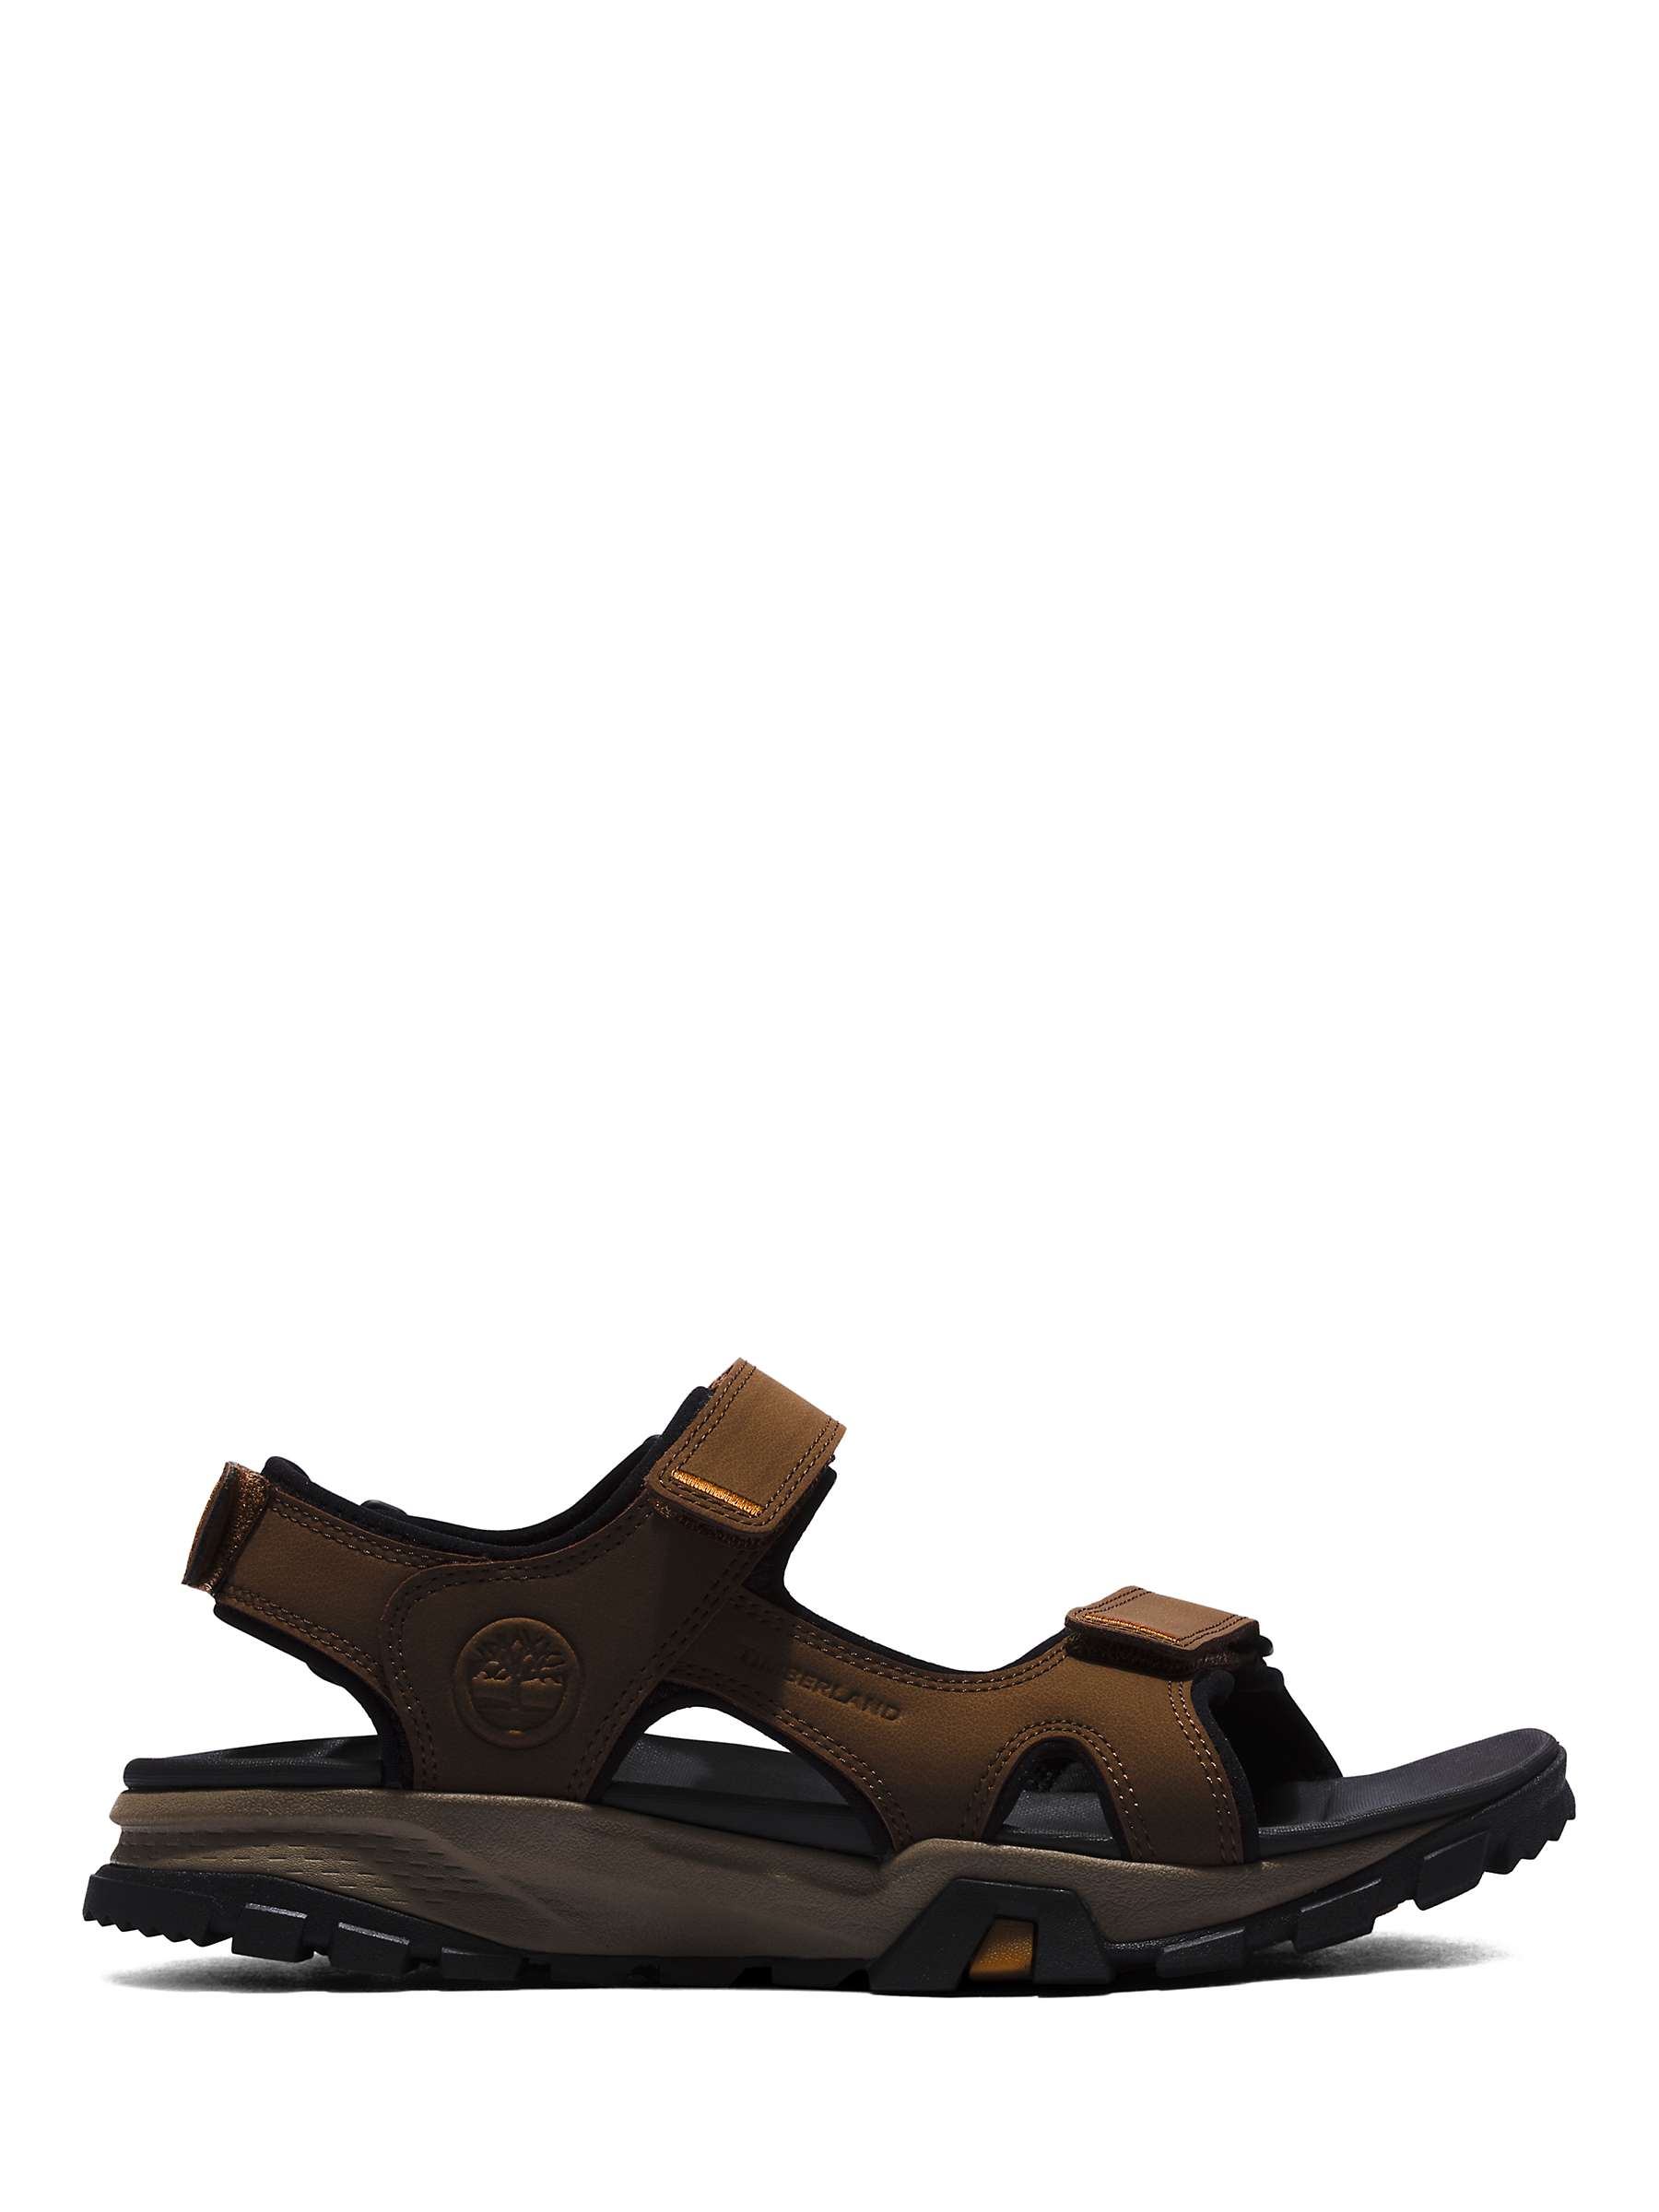 Buy Timberland Lincoln Peak Leather Sandals, Brown Online at johnlewis.com